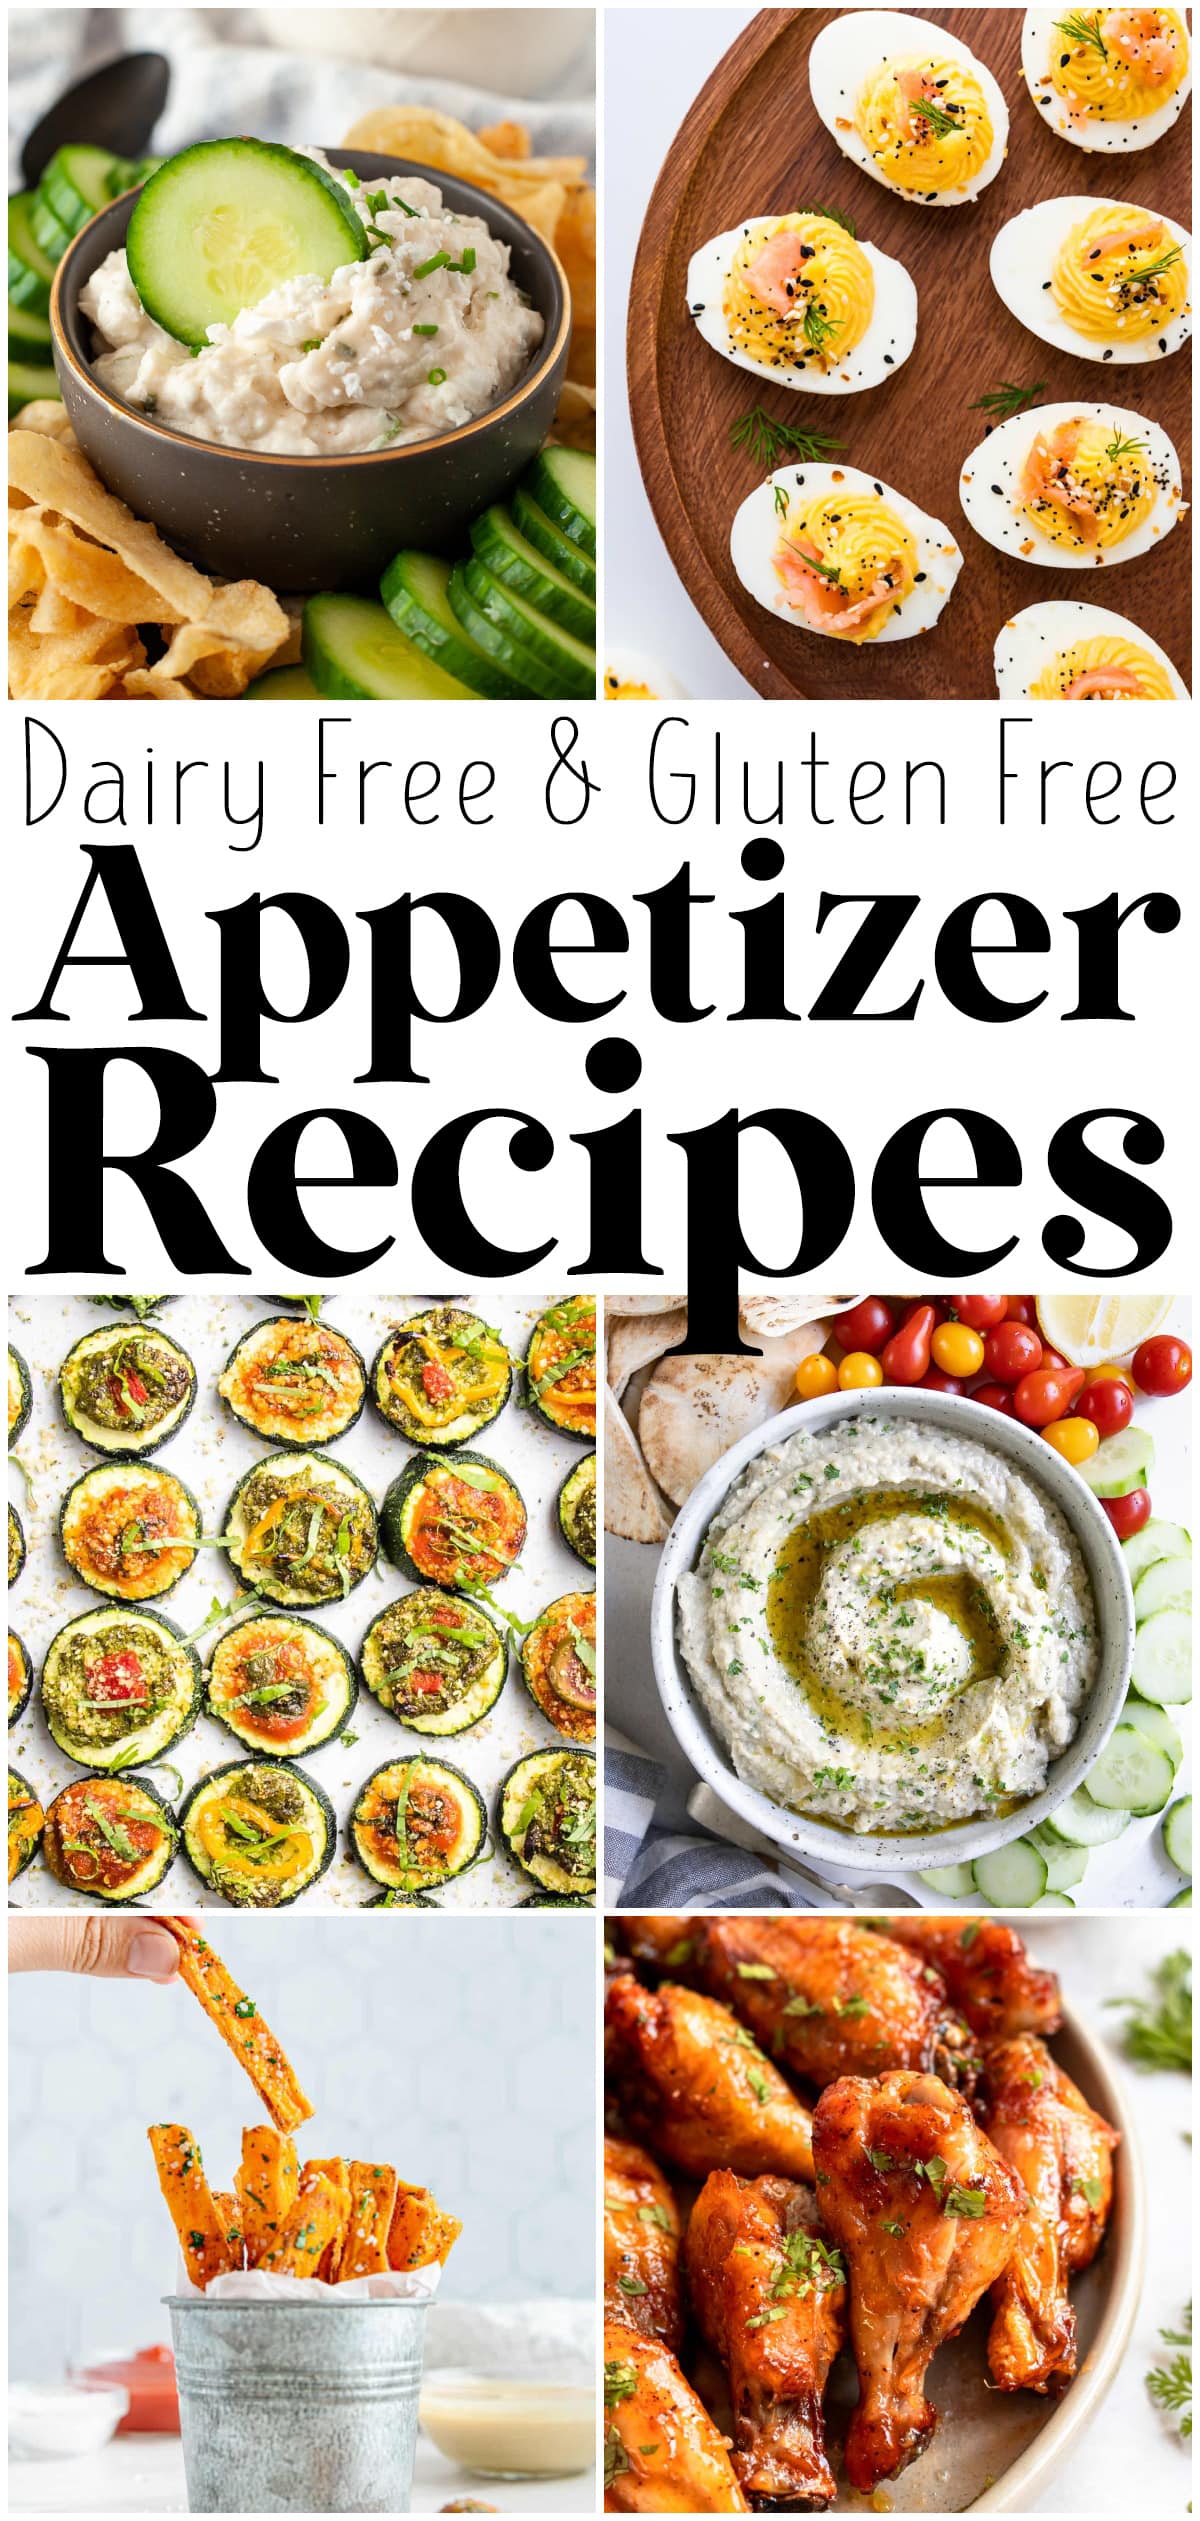 image collage of various allergy friendly appetizer recipes.